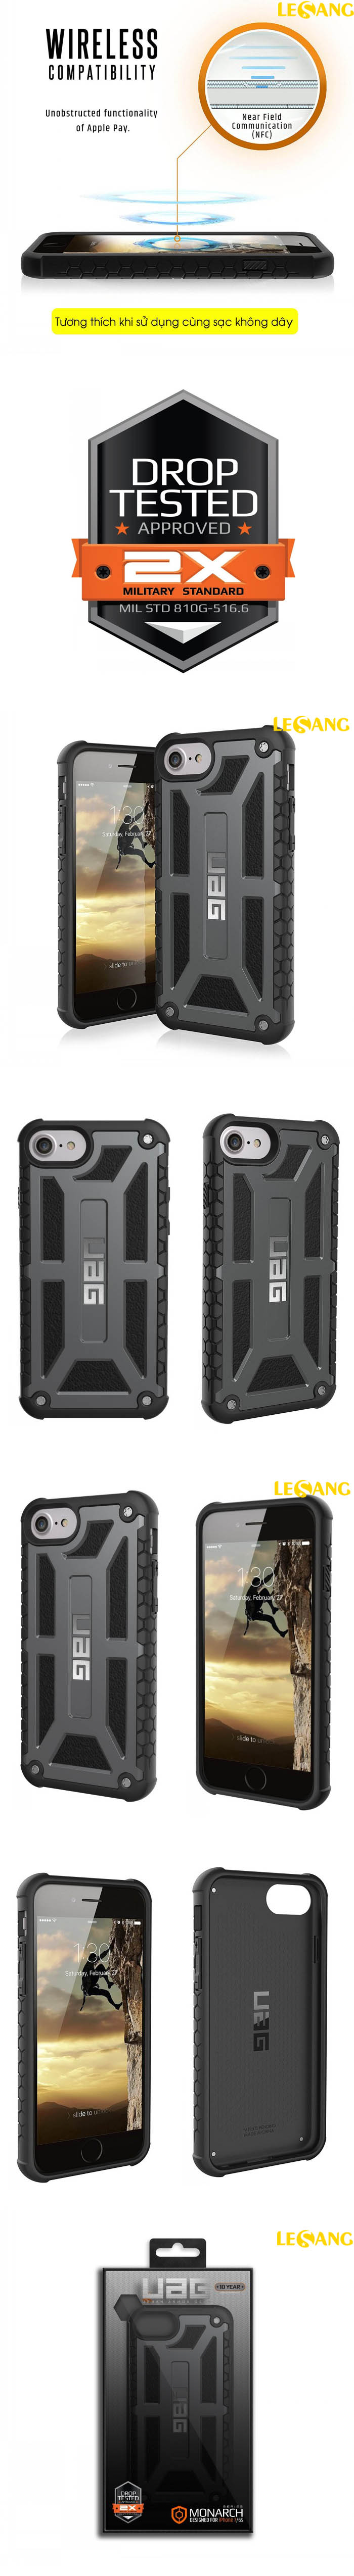 Ốp lưng iPhone 8 / iPhone 7 / iPhone 6 UAG Monarch Series 5 lớp 2536